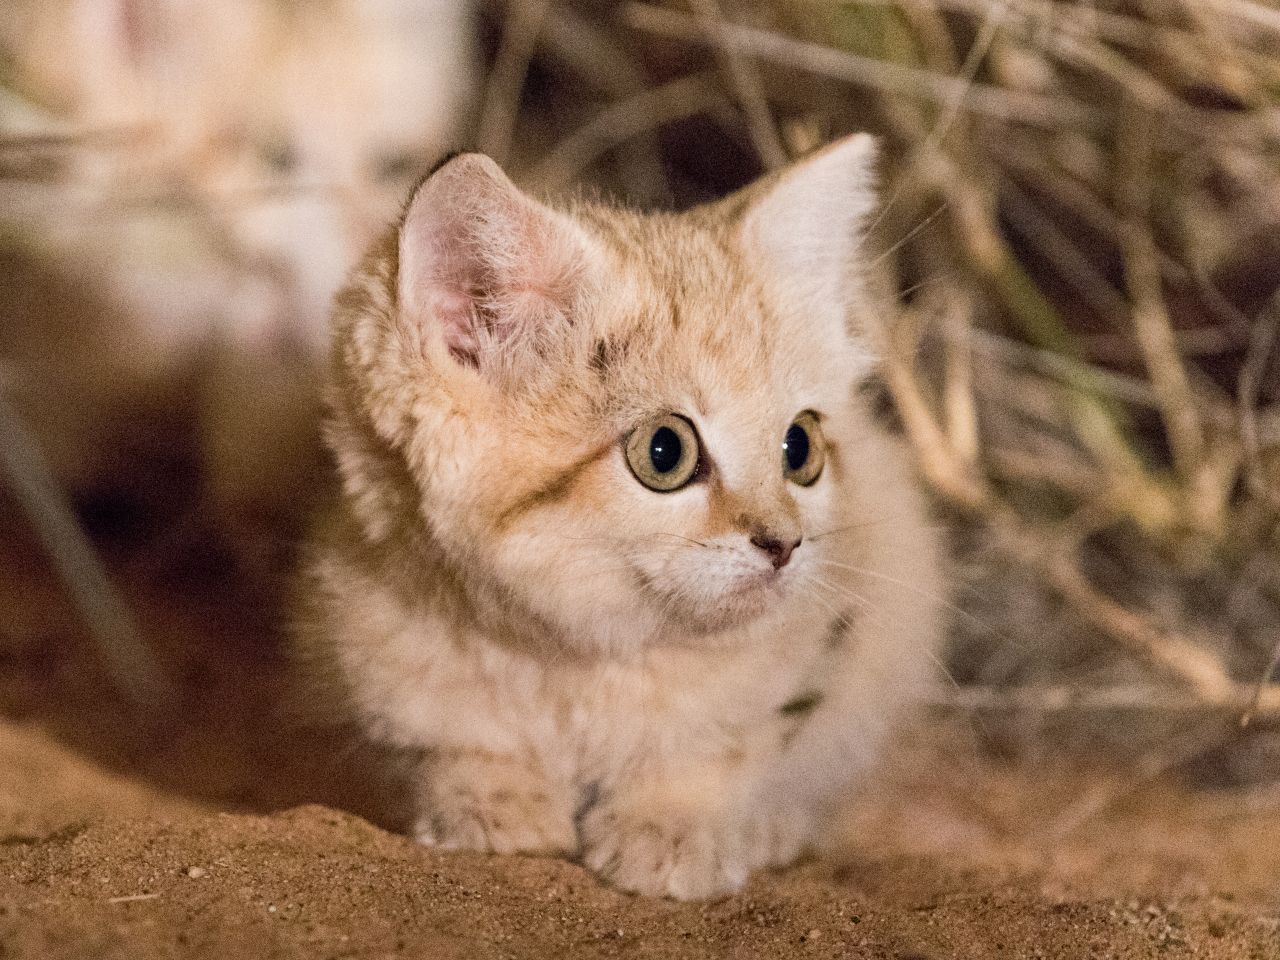 According to the report, larger ranges could suggest that the sand cat's population is smaller than previously thought. Breton hopes the research will draw attention to the understudied species and help spearhead its protection.